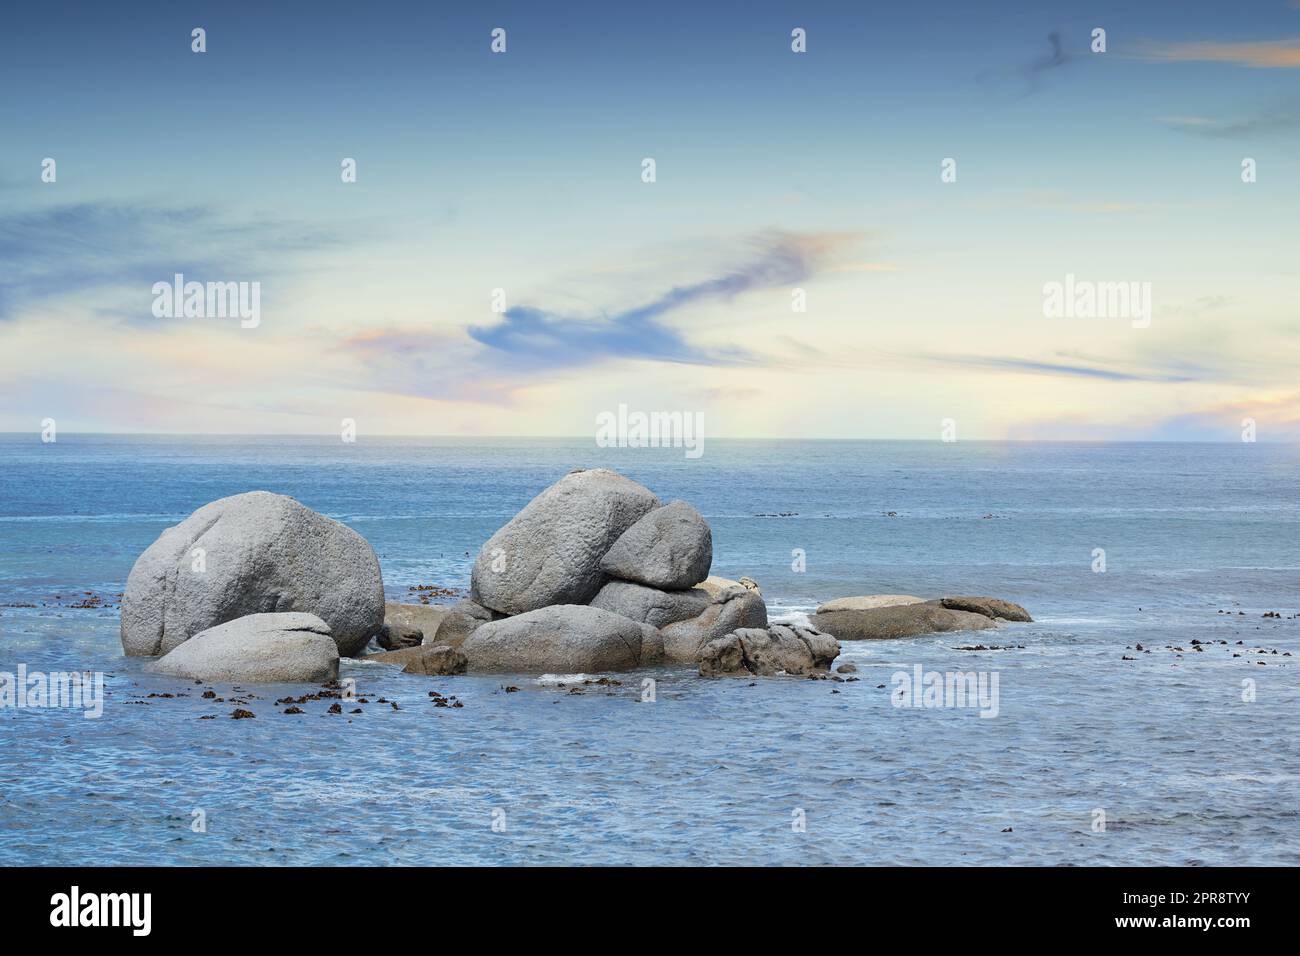 Copyspace at sea with a cloudy blue sky background and rocky coast in Western Cape South Africa. View of calm scenic sea landscape with rocks. Stunning destination for a summer holiday background Stock Photo